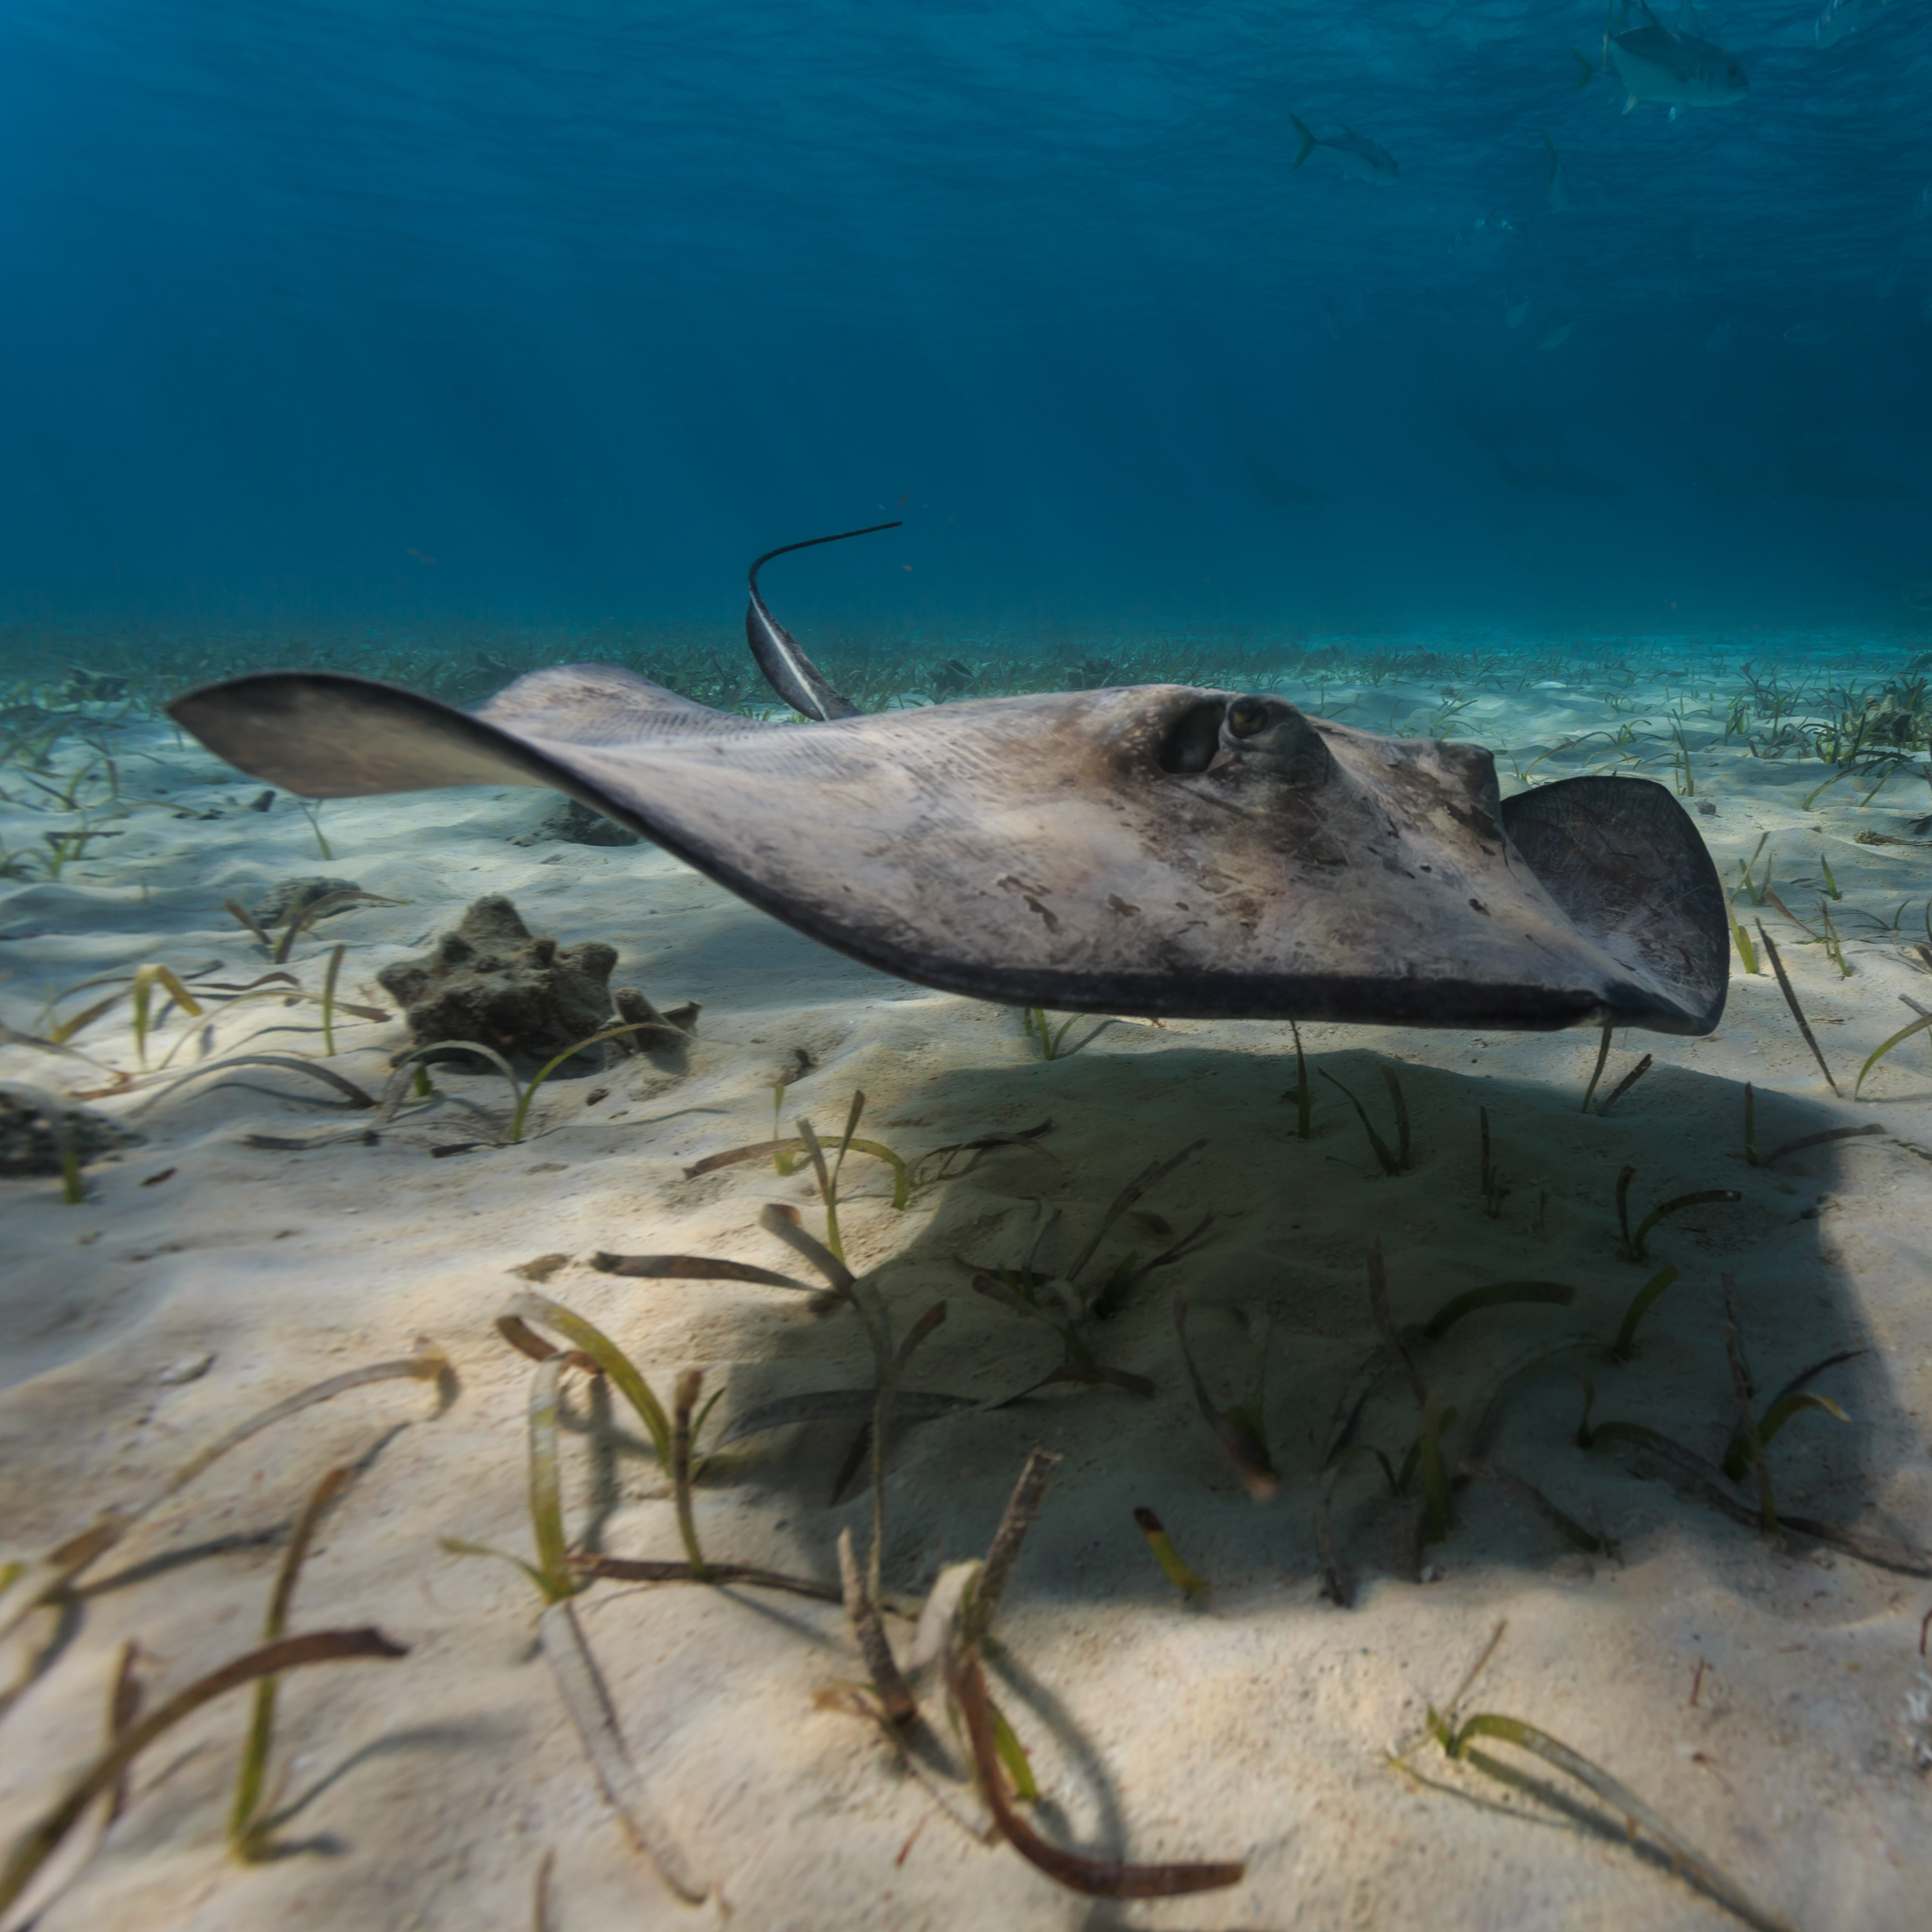 Belize in 2020 passed a comprehensive fisheries bill that protects all rays within 200 nautical miles of its coastline